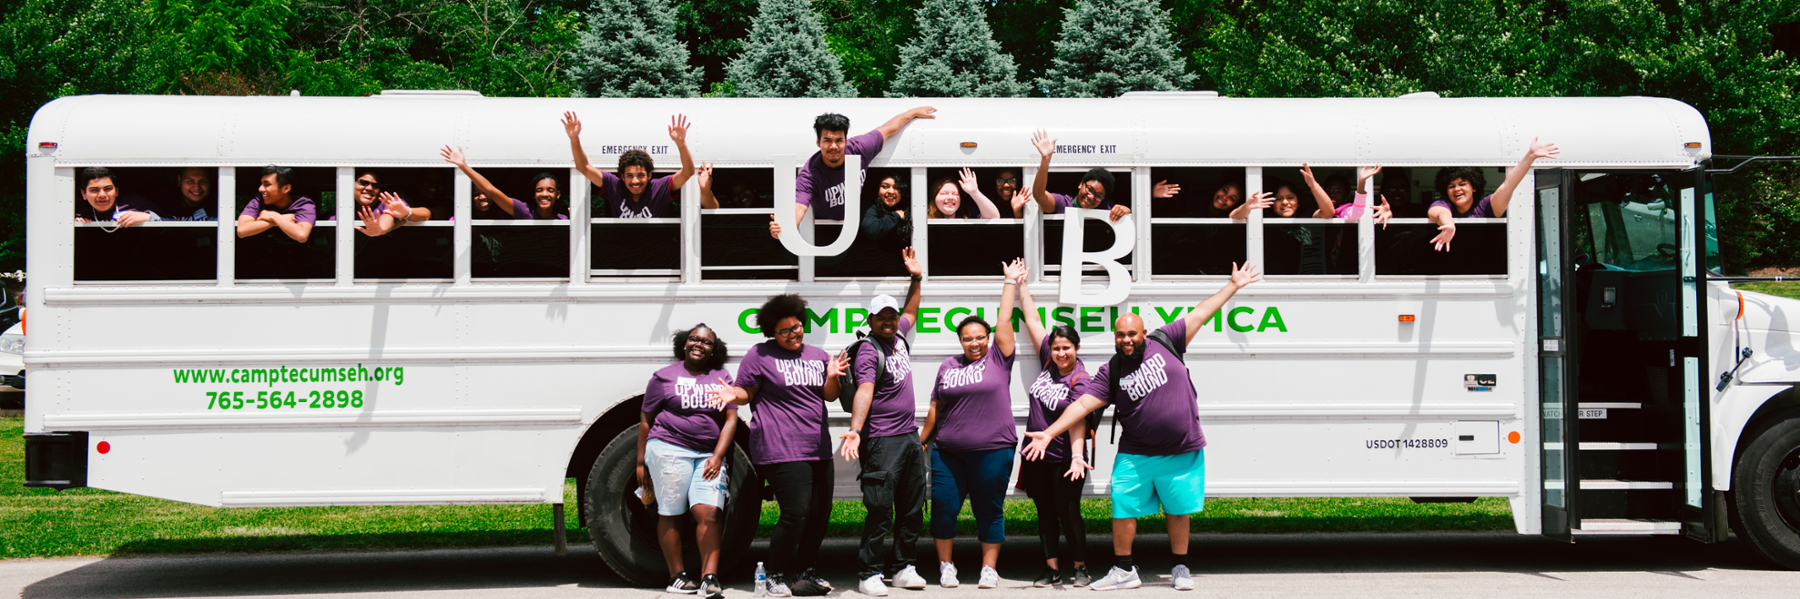 Upward Bound students smiling, raising their hands, and hanging out of a bus window holding the letters U and B.